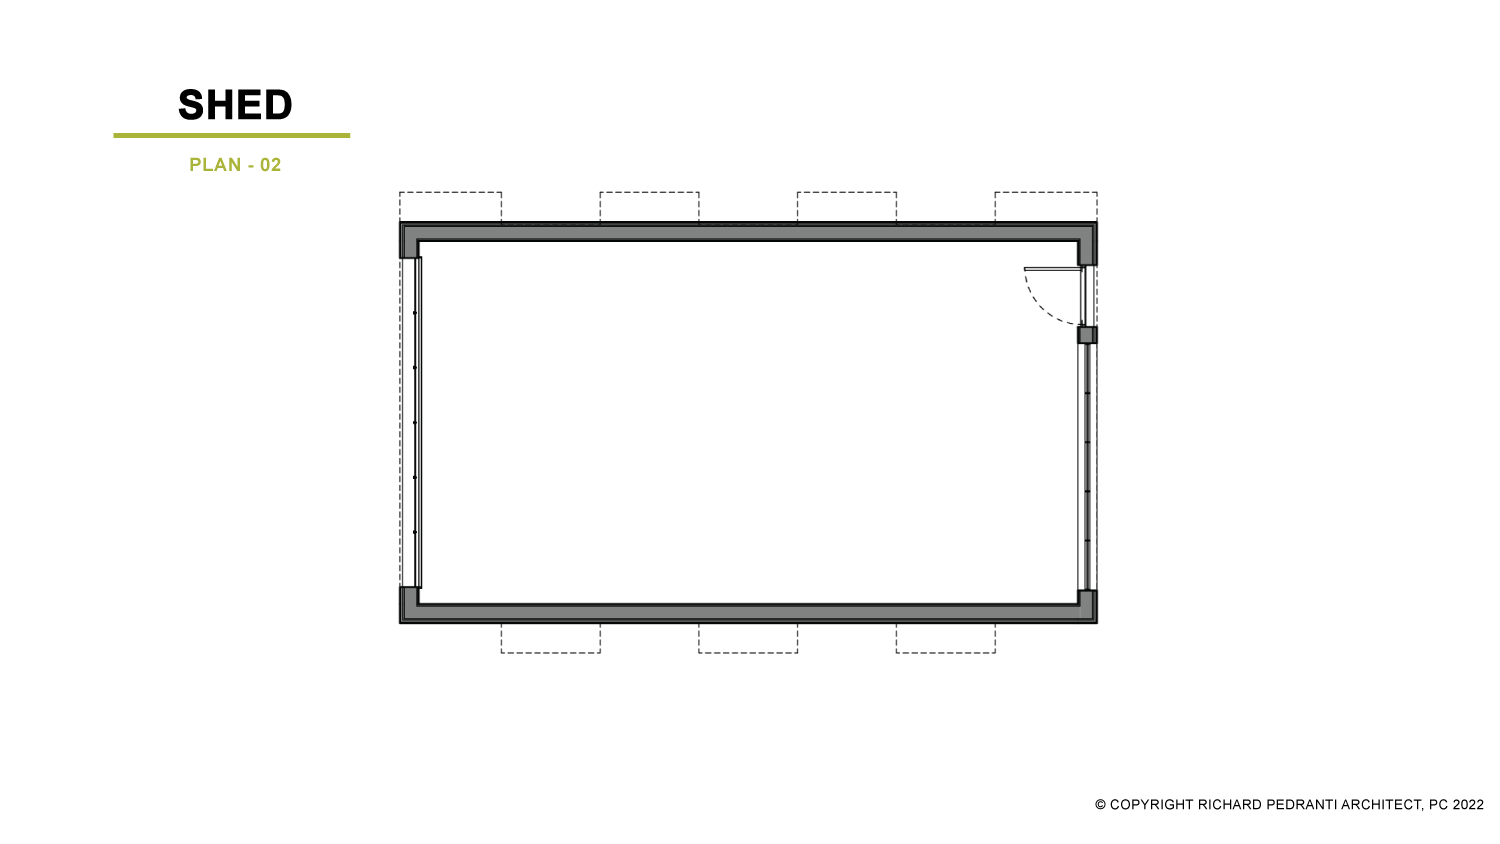 RPA ELEMENTS SHED 02 012822 PLAN